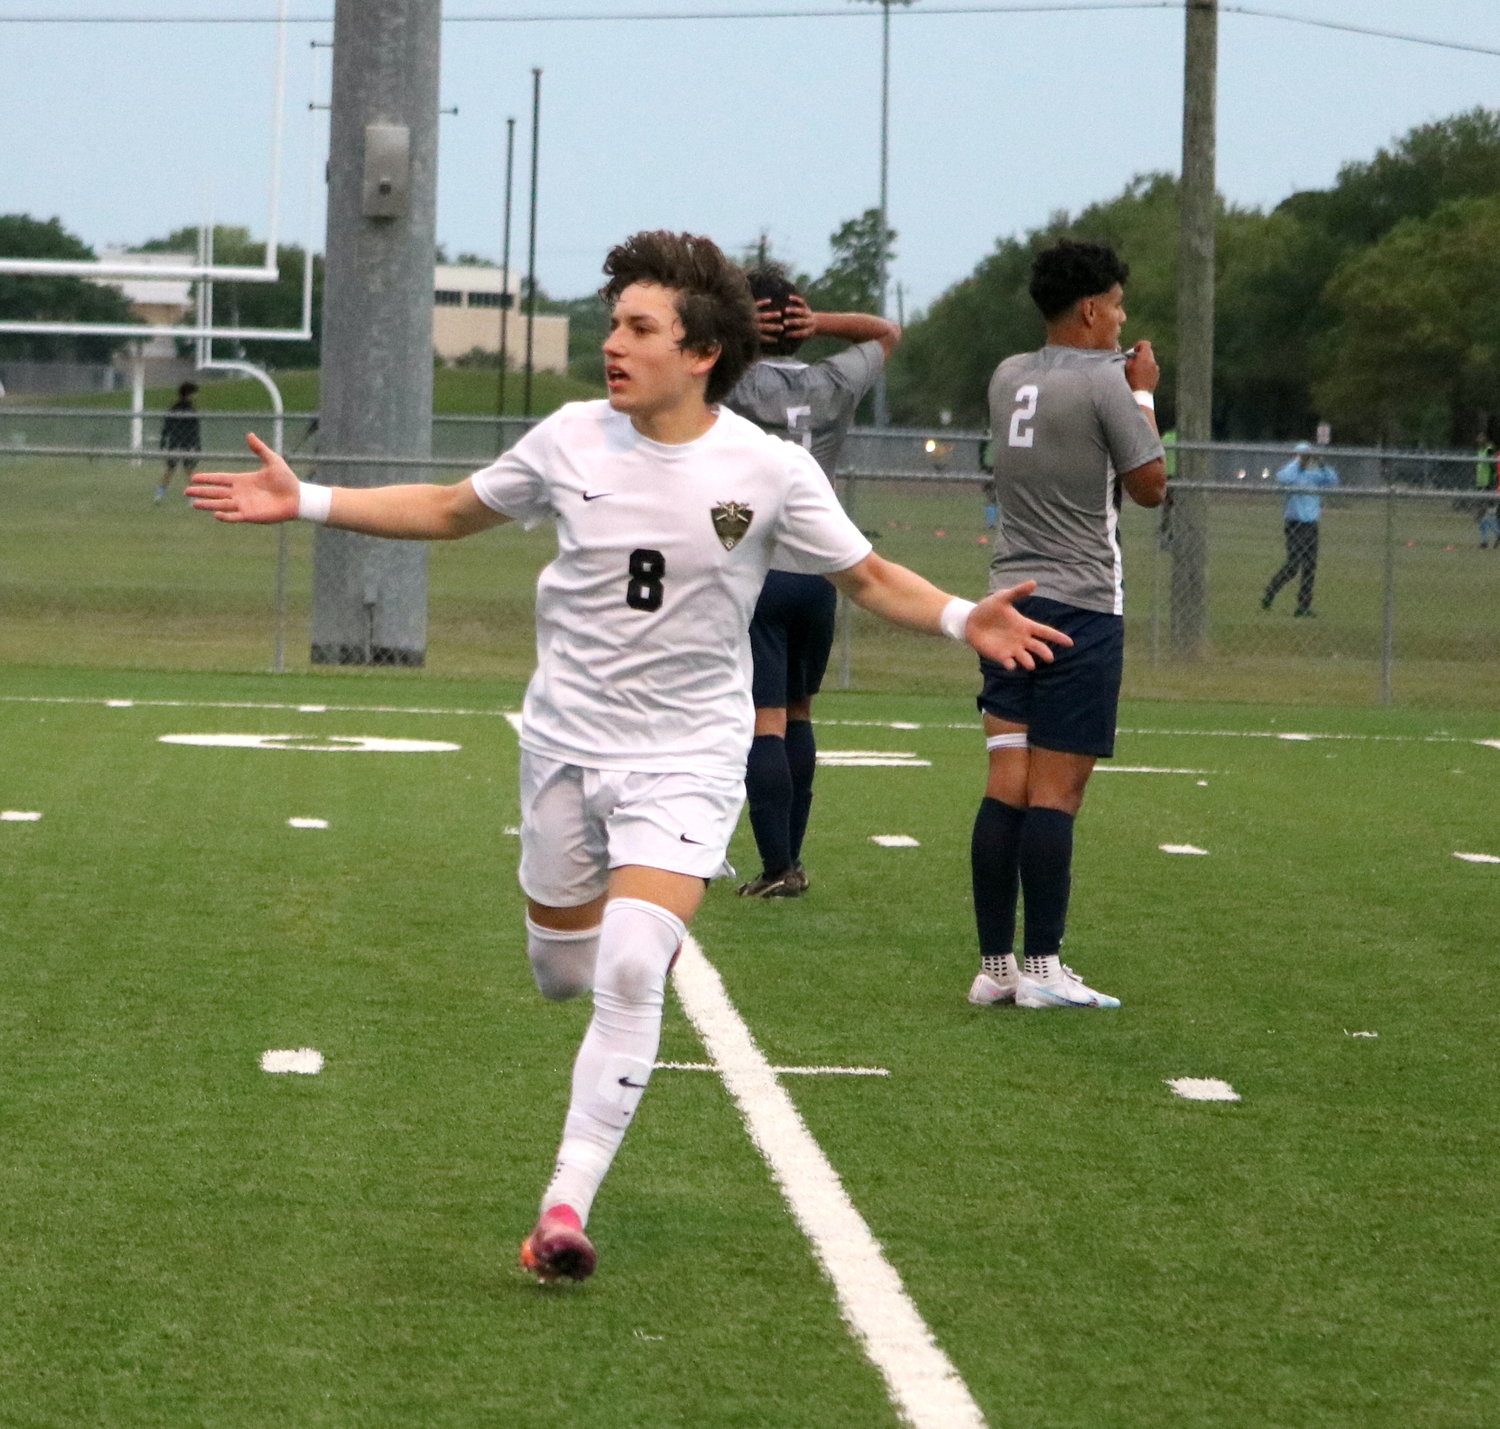 Marcelo Ojeda celebrates after scoring the game winning goal during Tuesday's match between Jordan and Cy-Ridge at the Spring Woods football field.